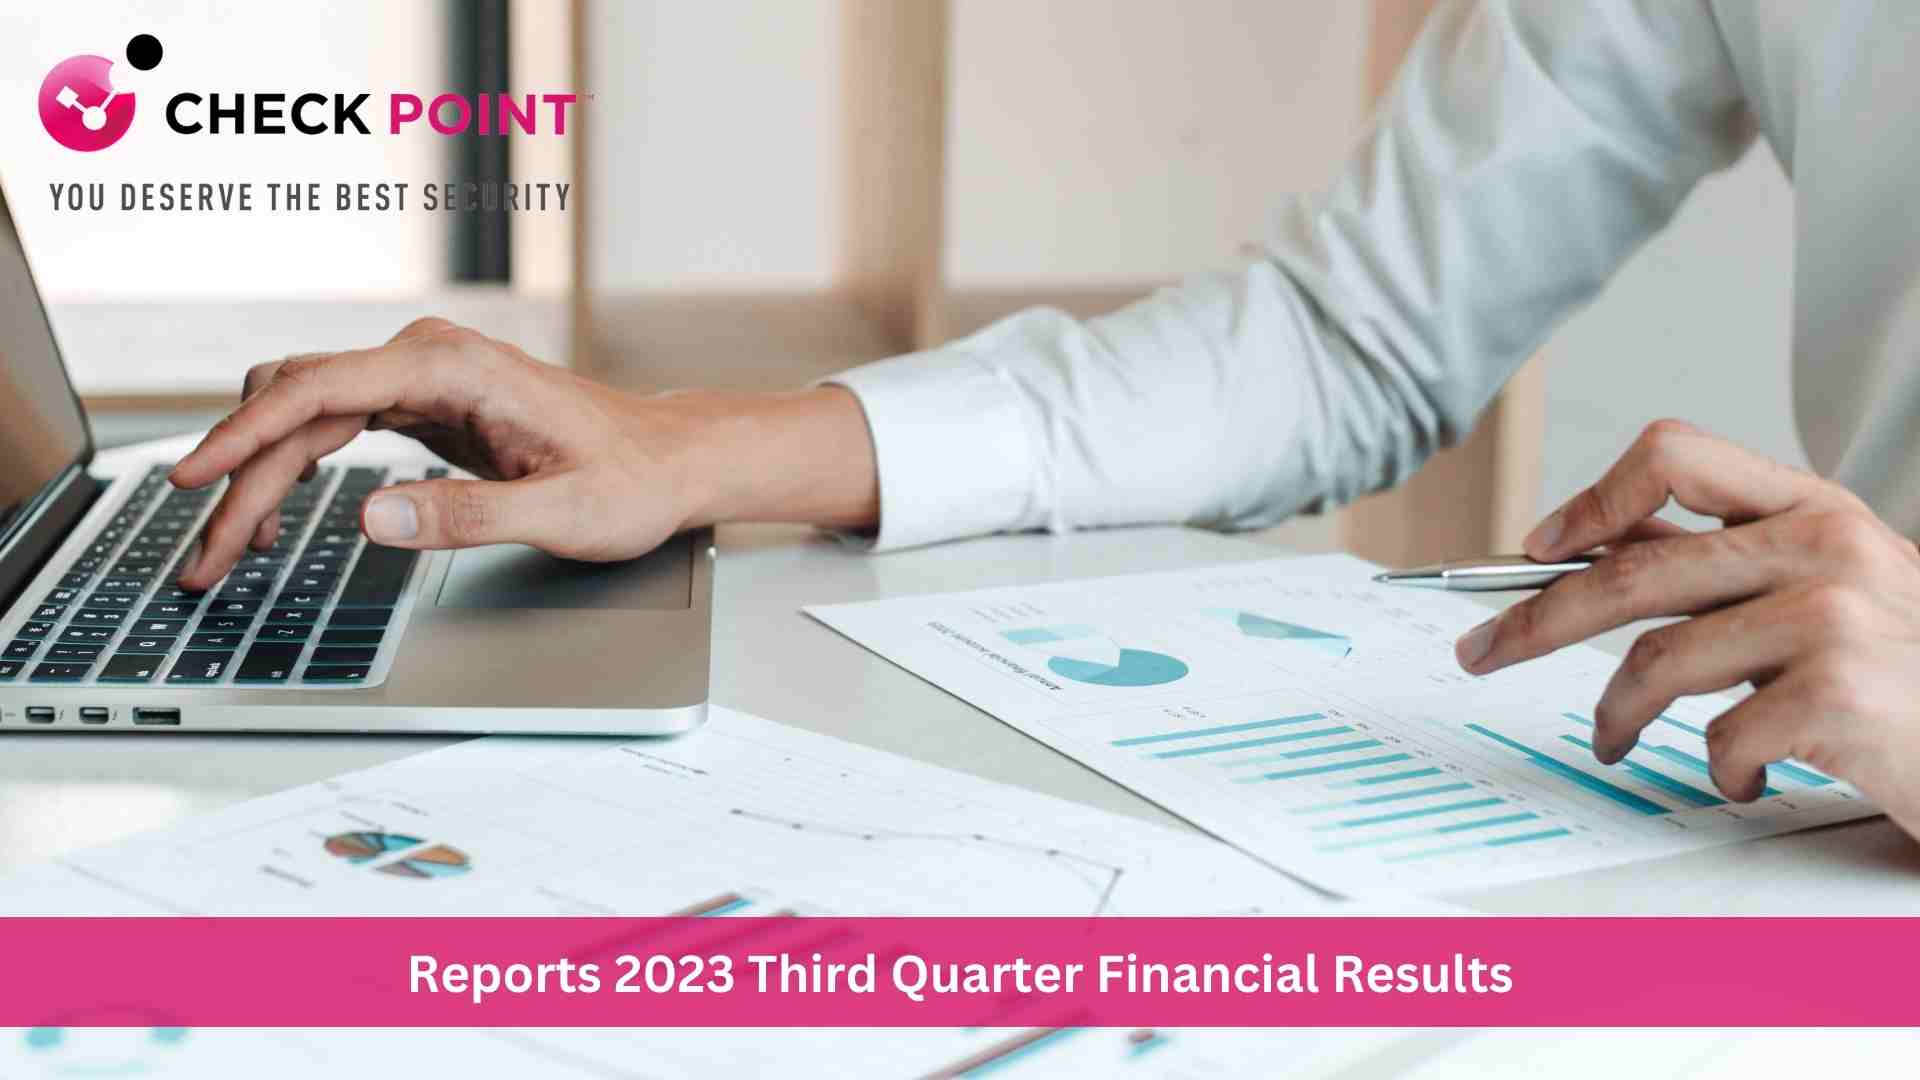 Check Point Software Reports 2023 Third Quarter Financial Results